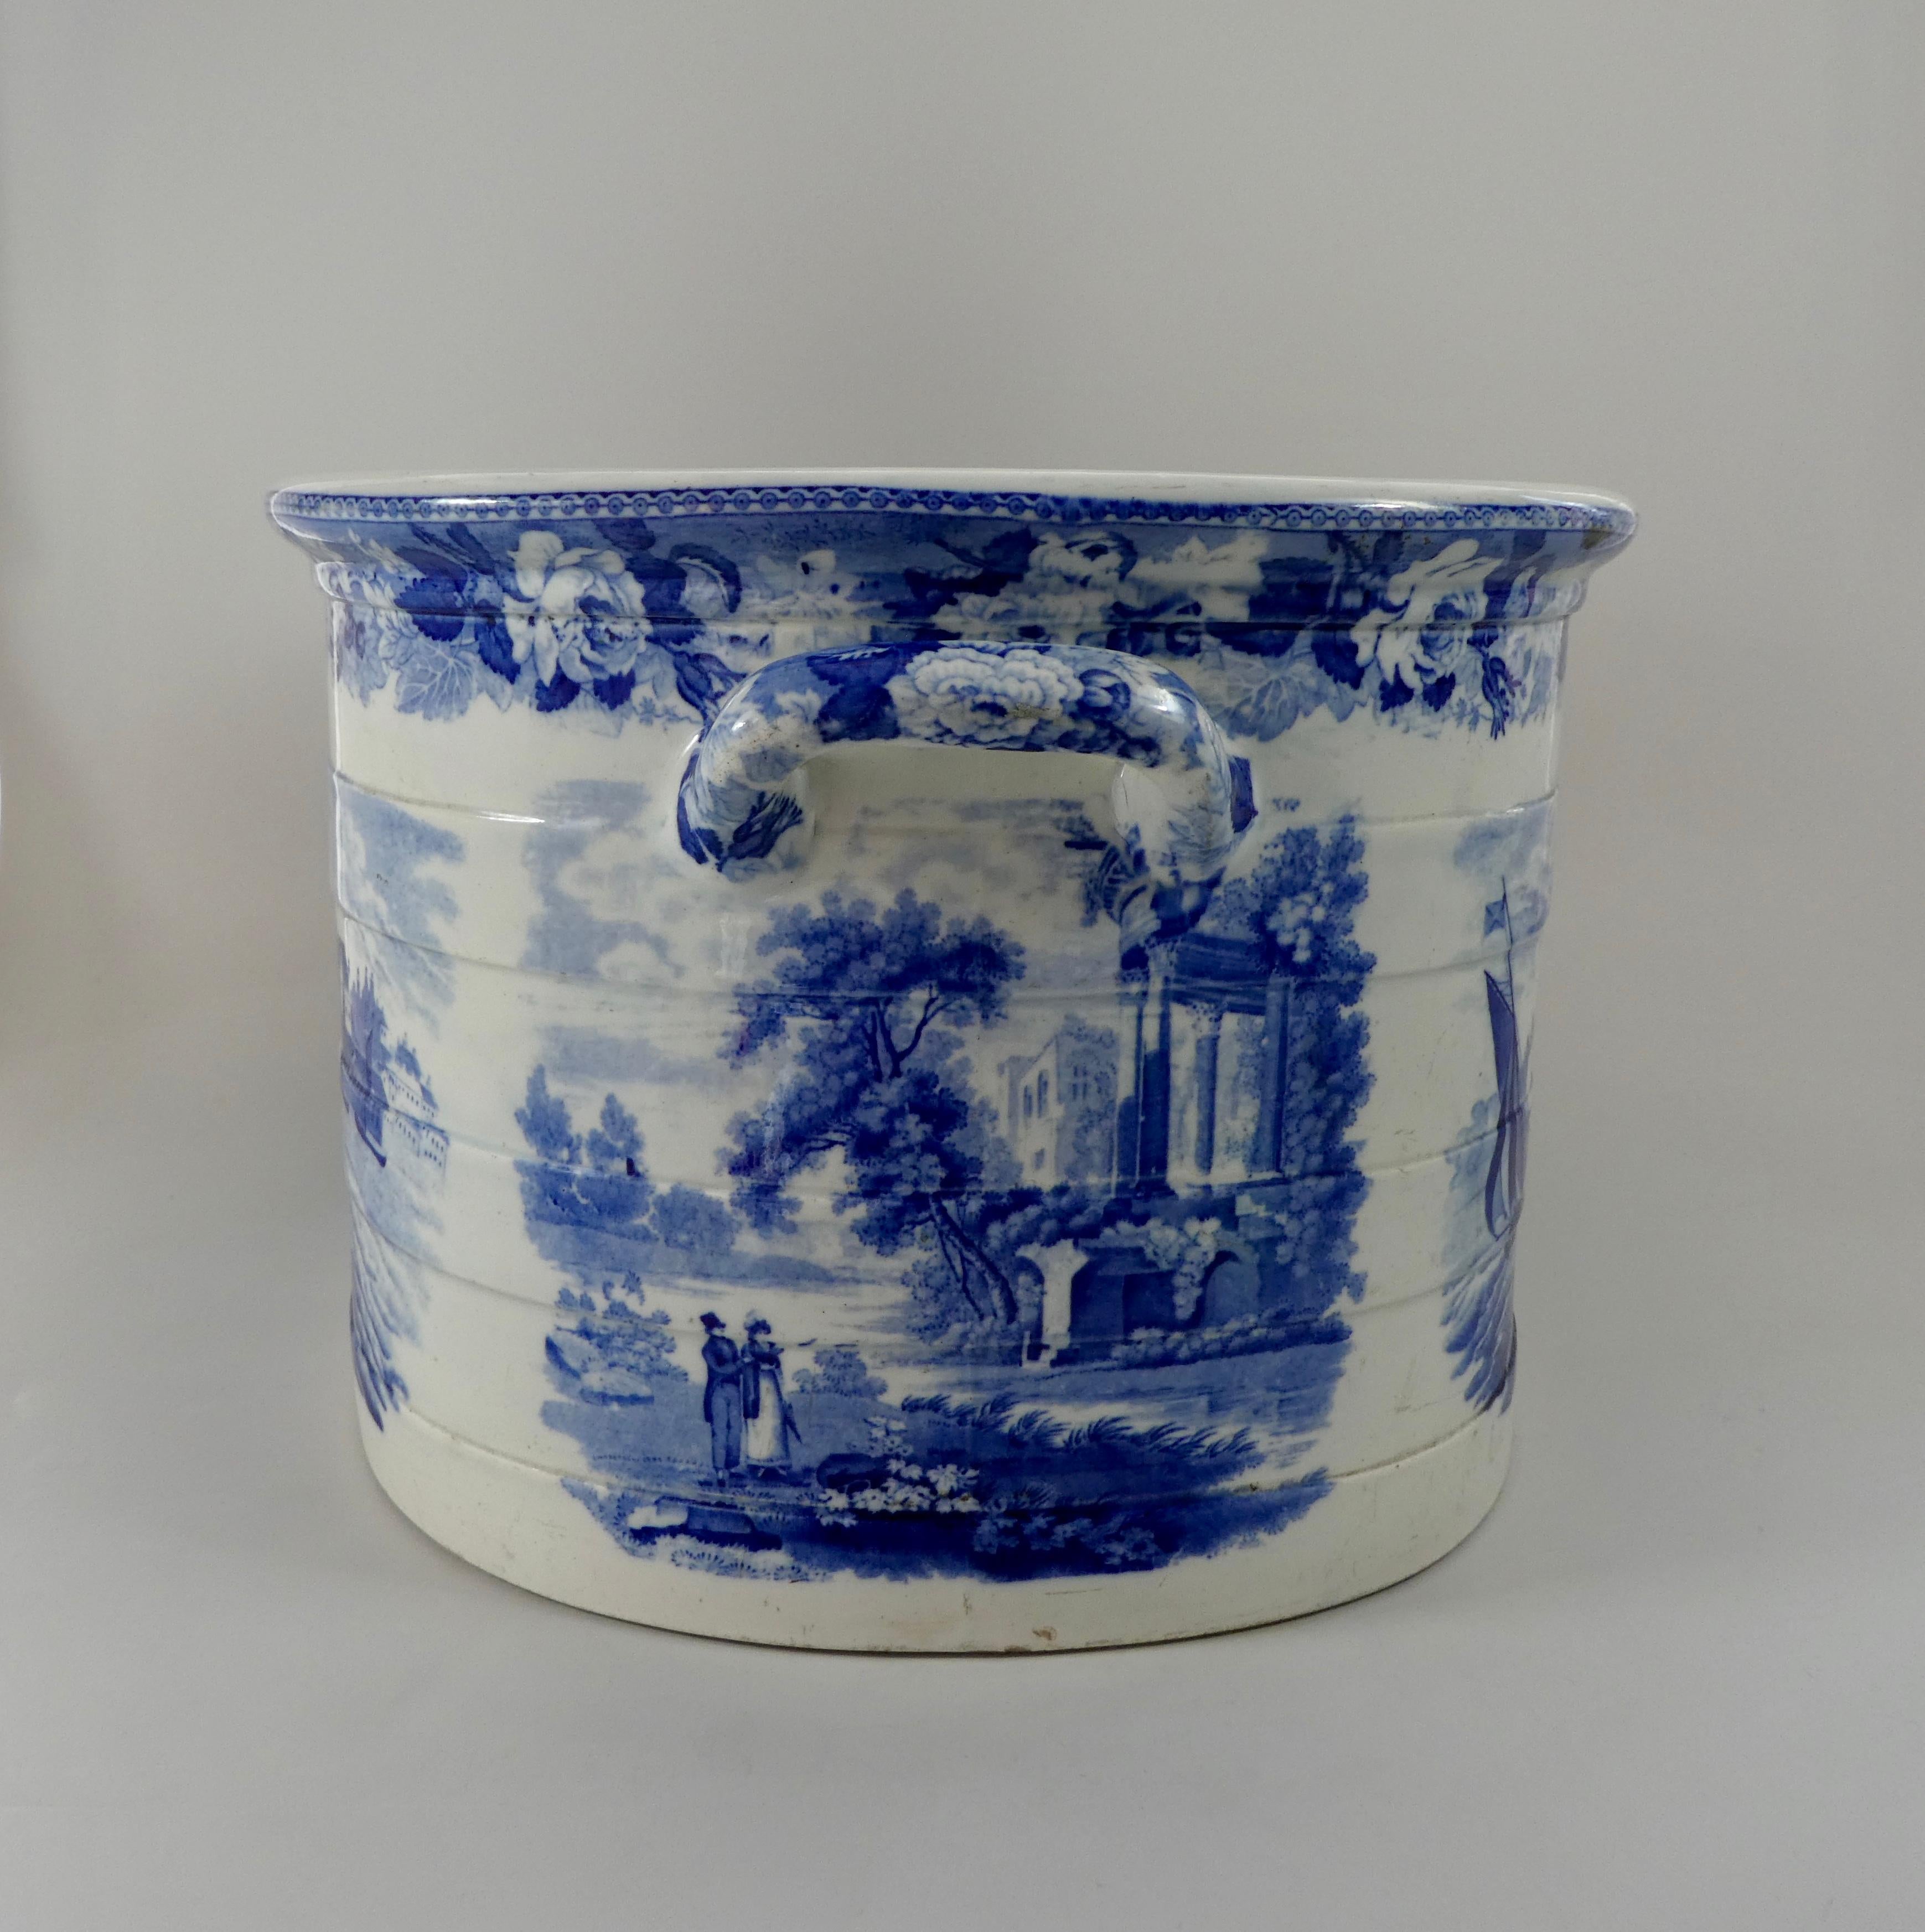 Fired Wedgwood Pottery Foot Bath. ‘Tower of London from the Thames’, circa 1820